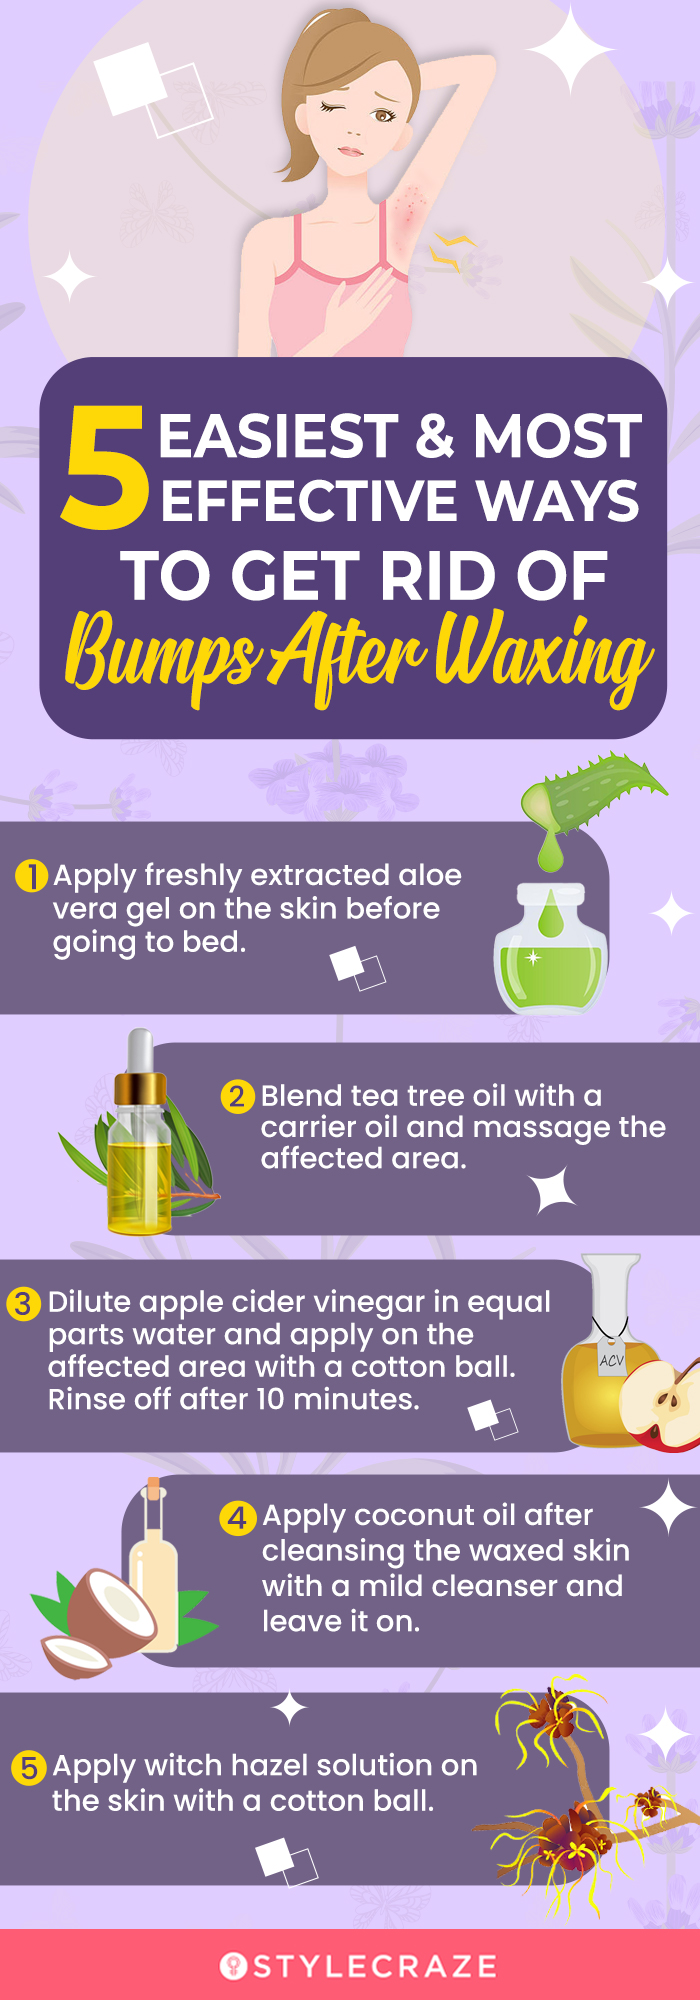 5 Home Remedies To Get Rid Of Bumps After Waxing